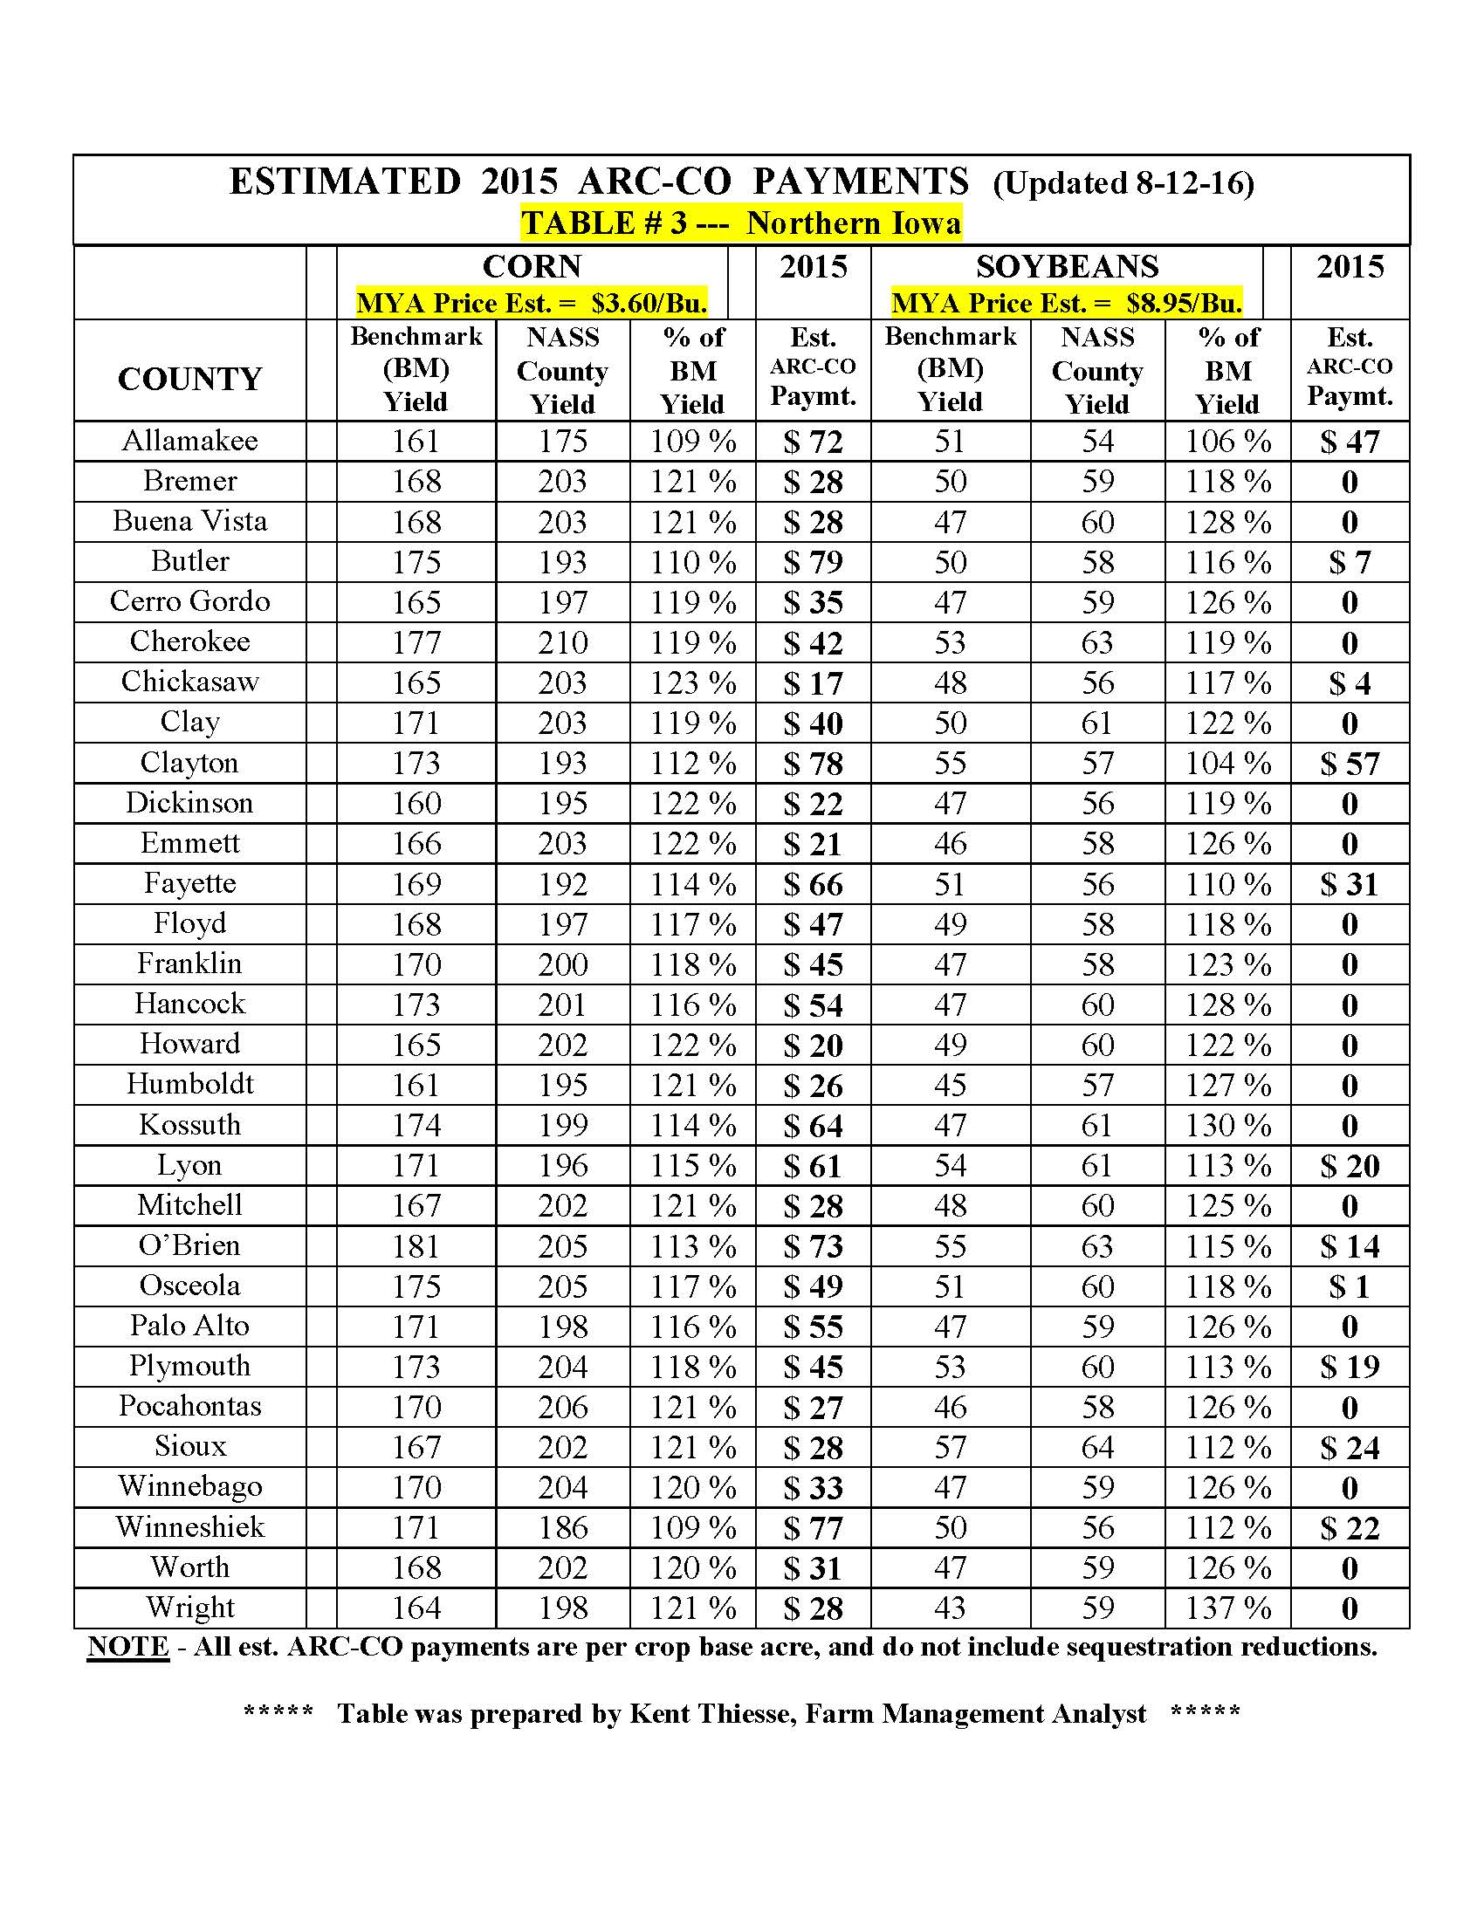 2015 ARC-CO PAYMENT TABLES (8-22-16)_Page_3